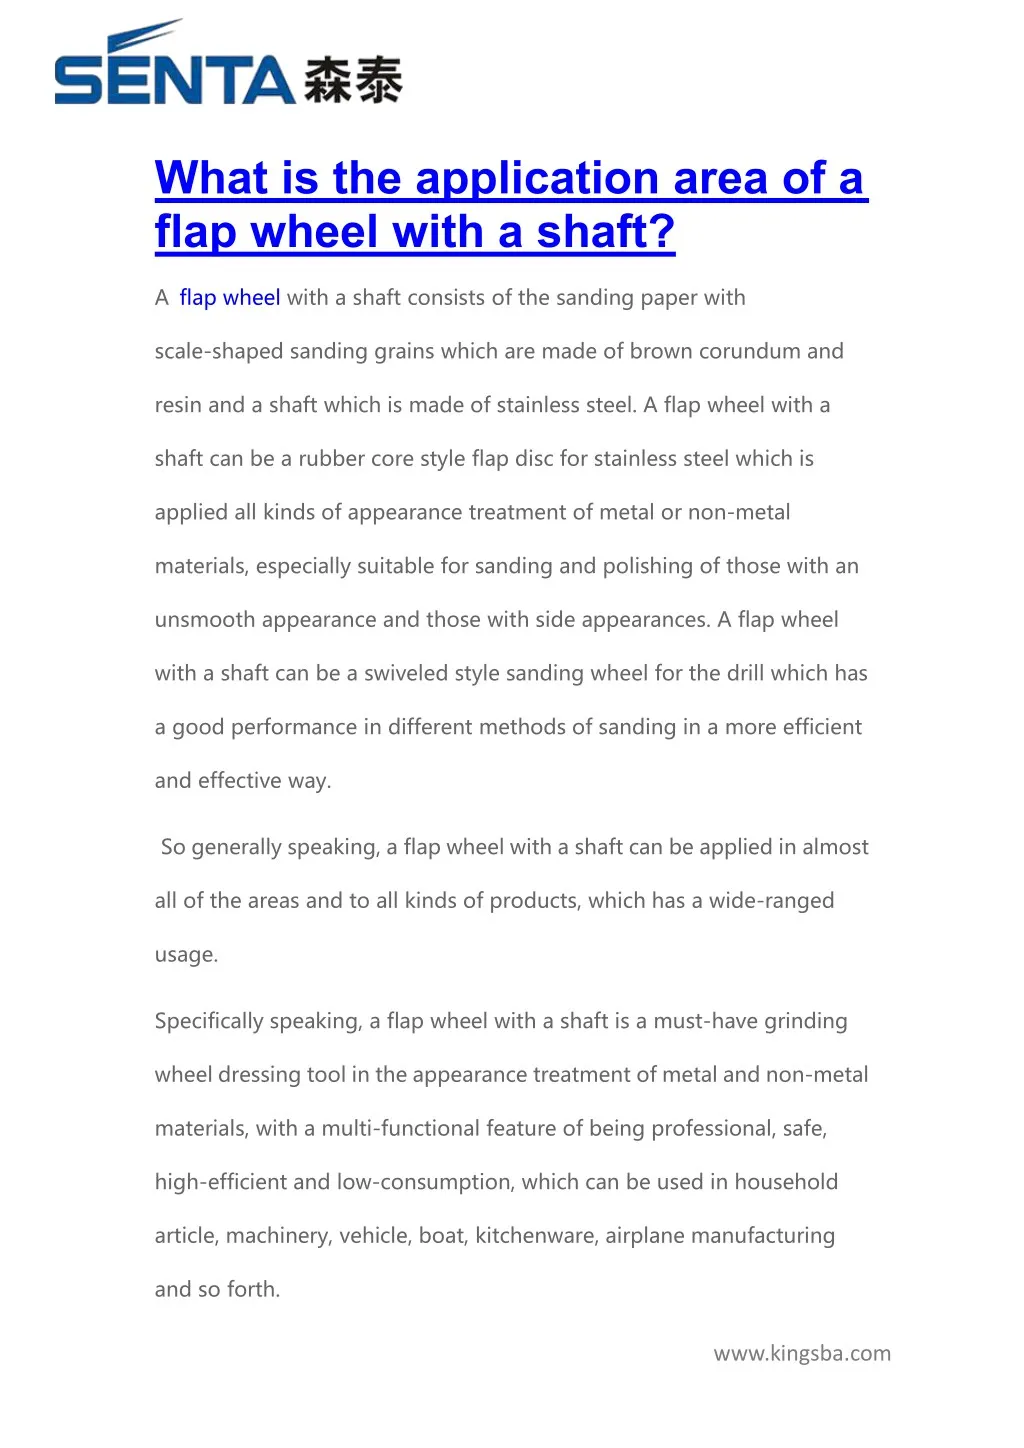 what is the application area of a flap wheel with